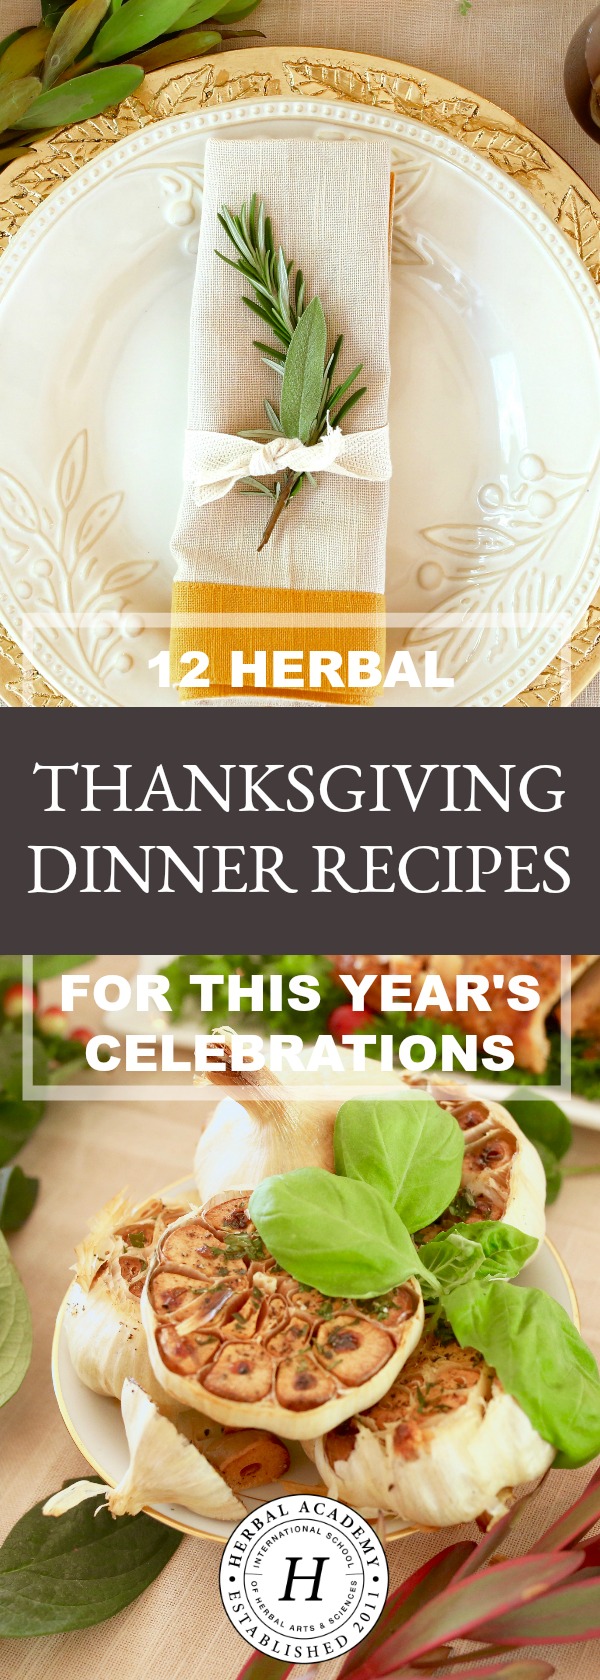 12 Herbal Thanksgiving Dinner Recipes For This Year’s Celebrations | Herbal Academy | Are you looking for ways to spice up your Thanksgiving dinner this year? We have 12 Thanksgiving dinner recipes for you that incorporate 17 different herbs!